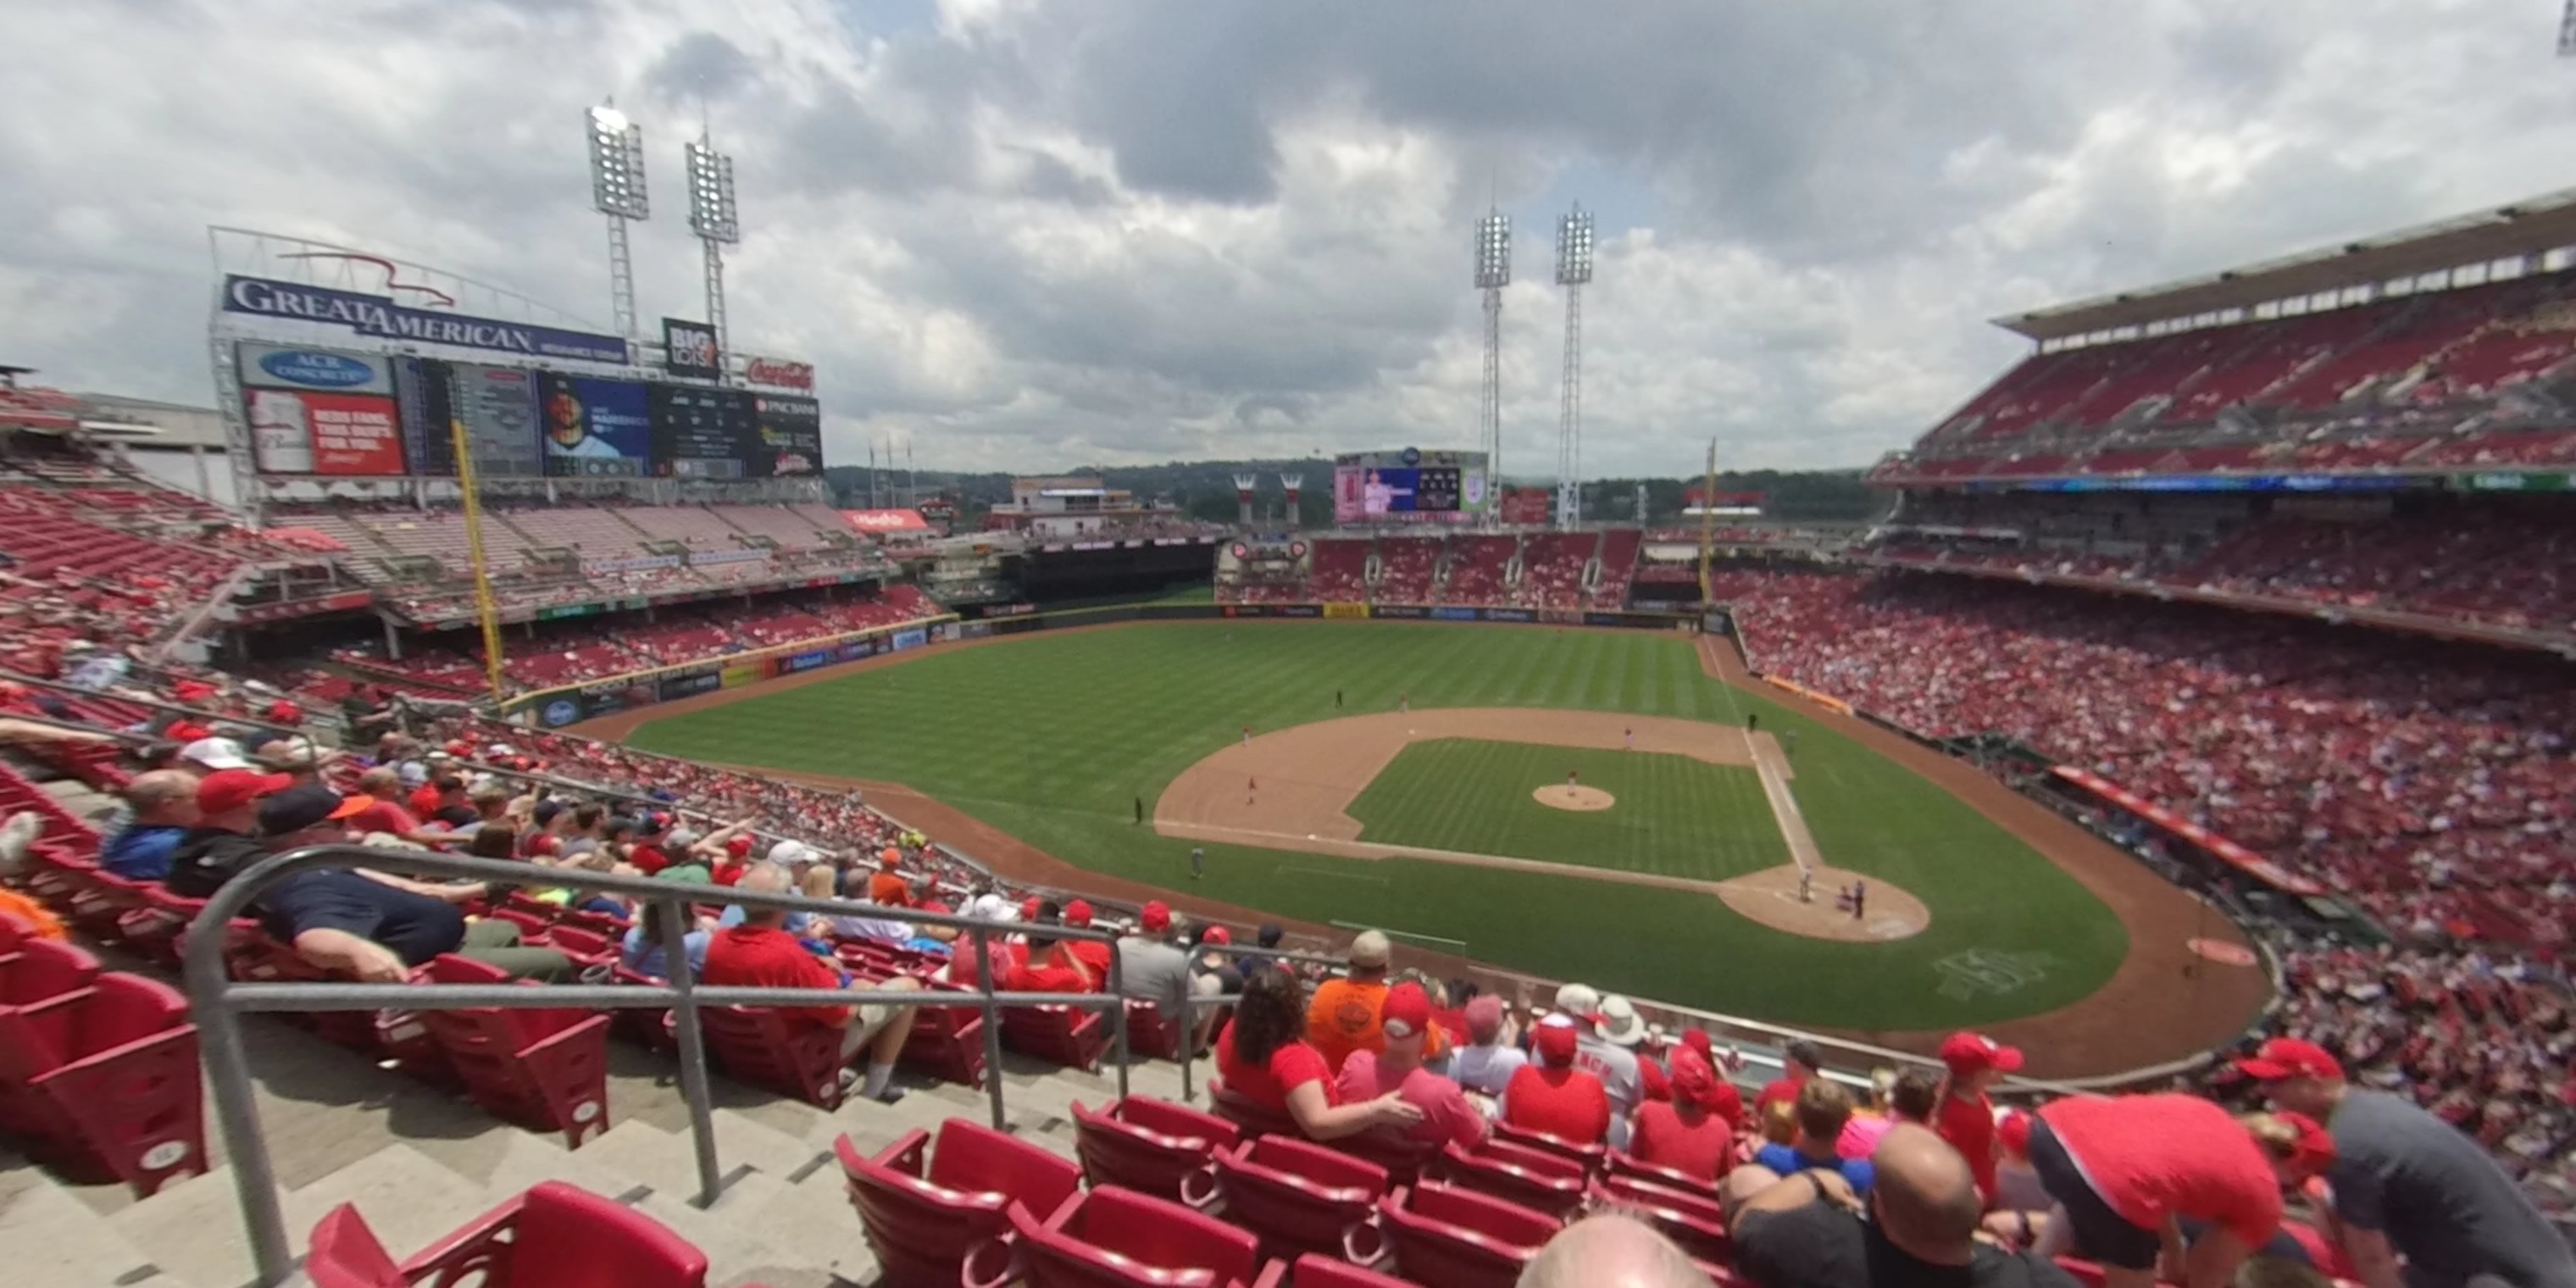 section 419 panoramic seat view  for baseball - great american ball park